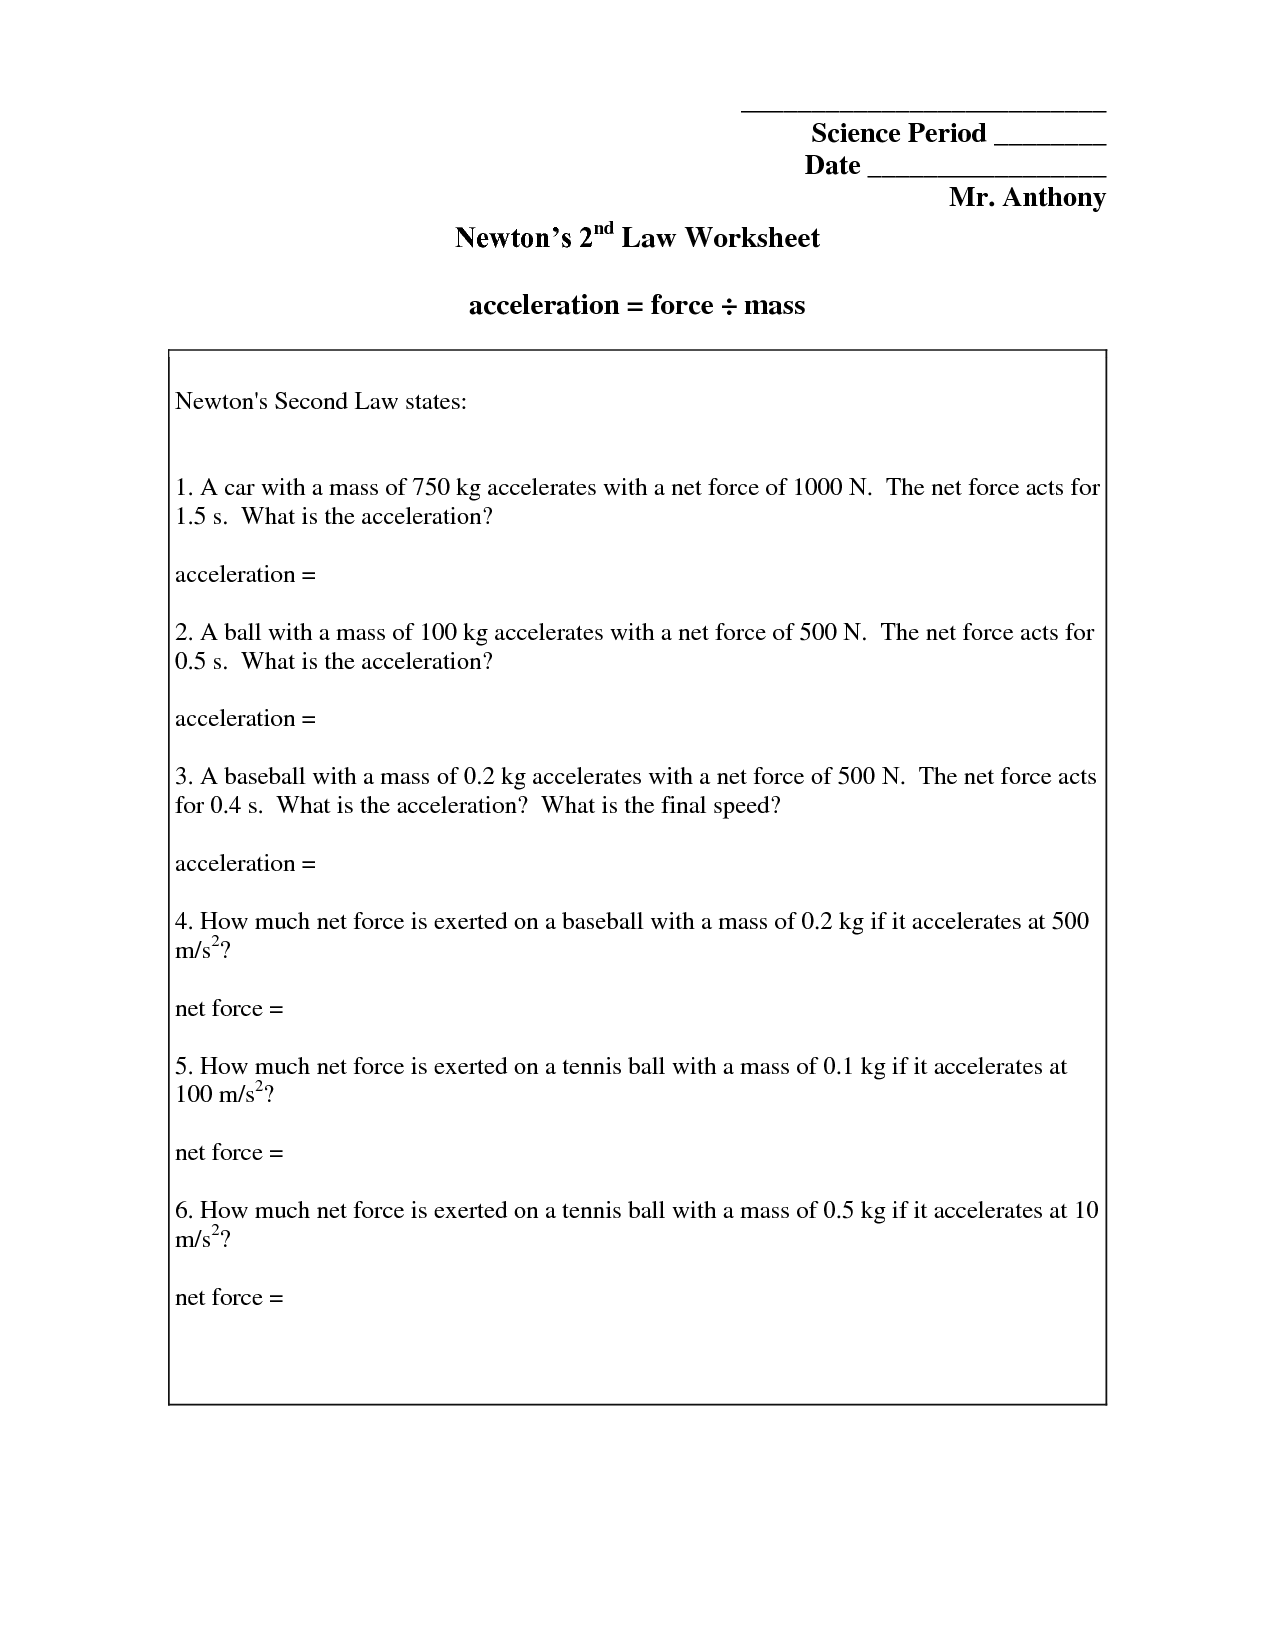 39-newton-s-second-law-worksheet-answer-key-blog-dicovery-education